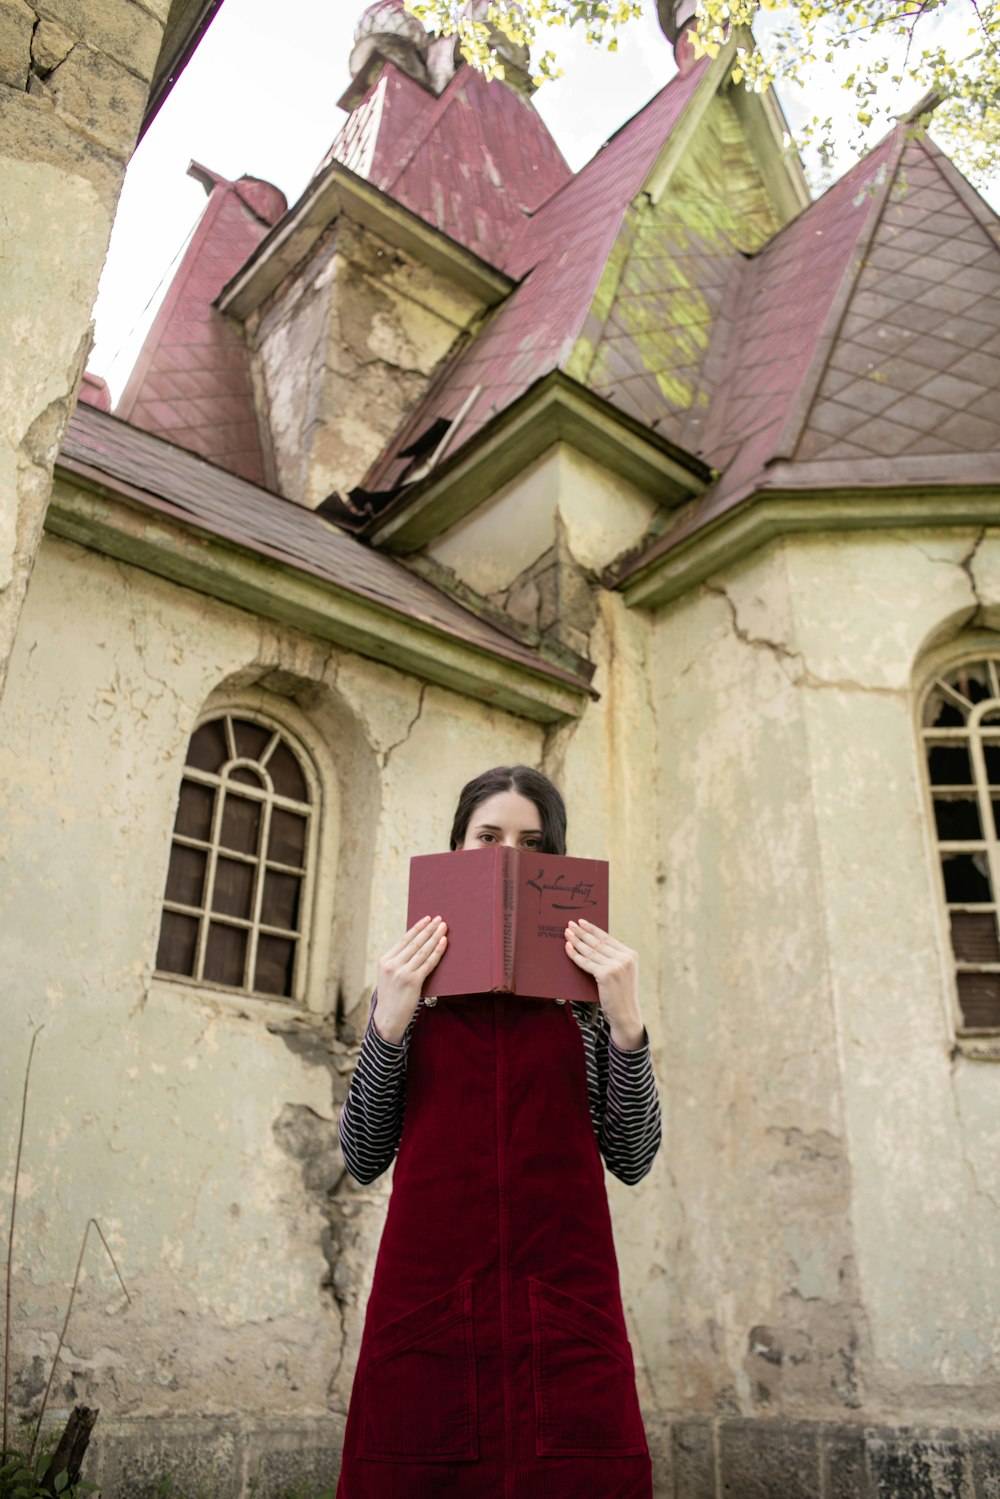 a person in a red dress holding a book in front of a building